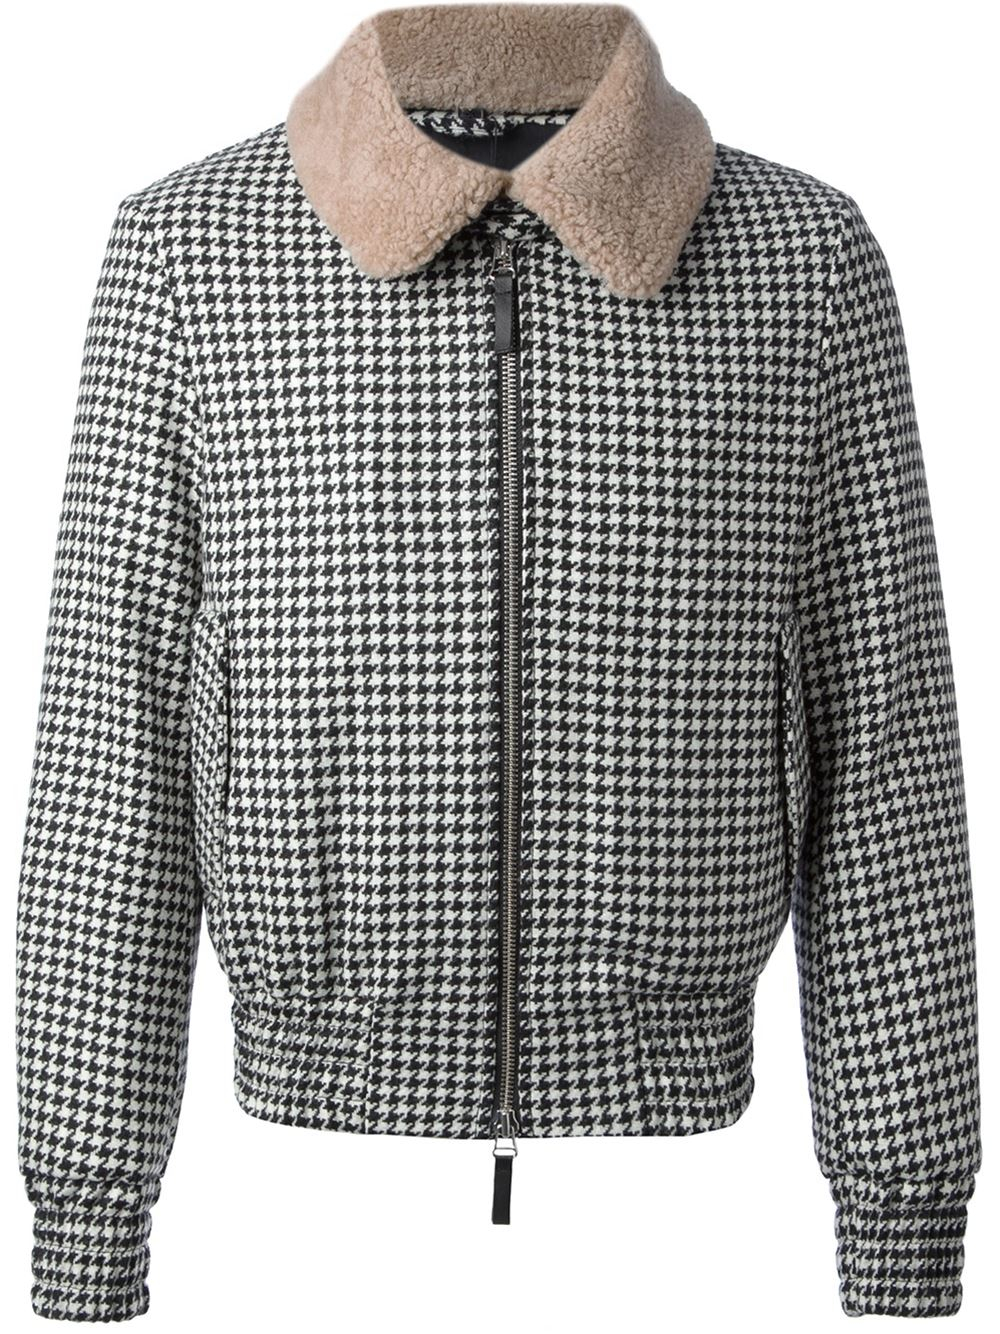 Lyst - Ami Houndstooth Check Bomber Jacket in White for Men